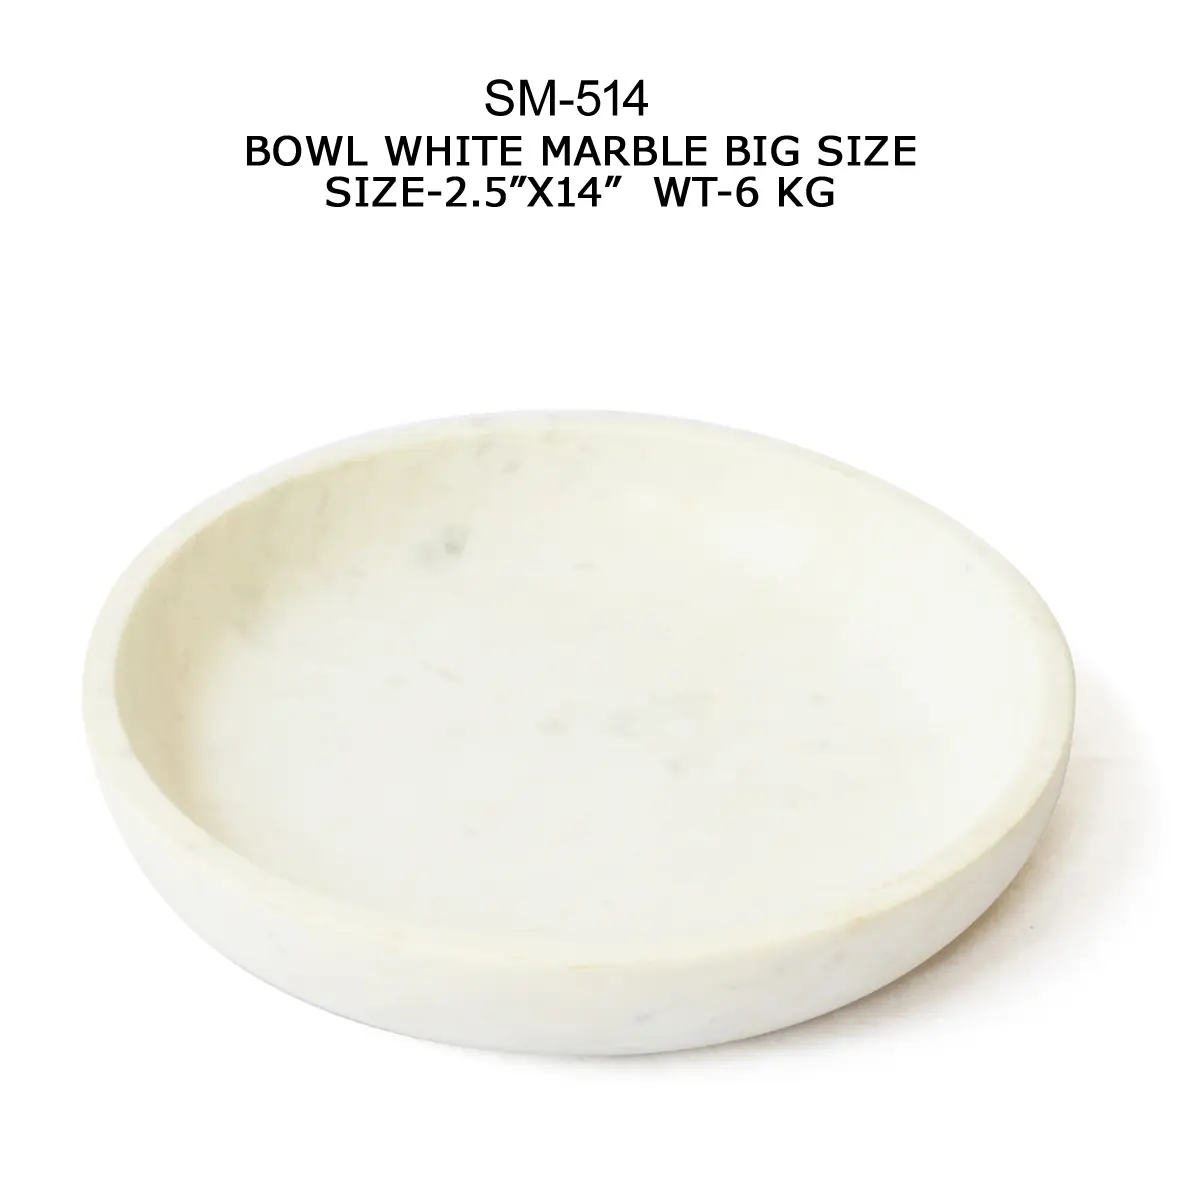 BOWL SAMPLE NO. 13 IN WHITE MARBLE IN BIG SIZE